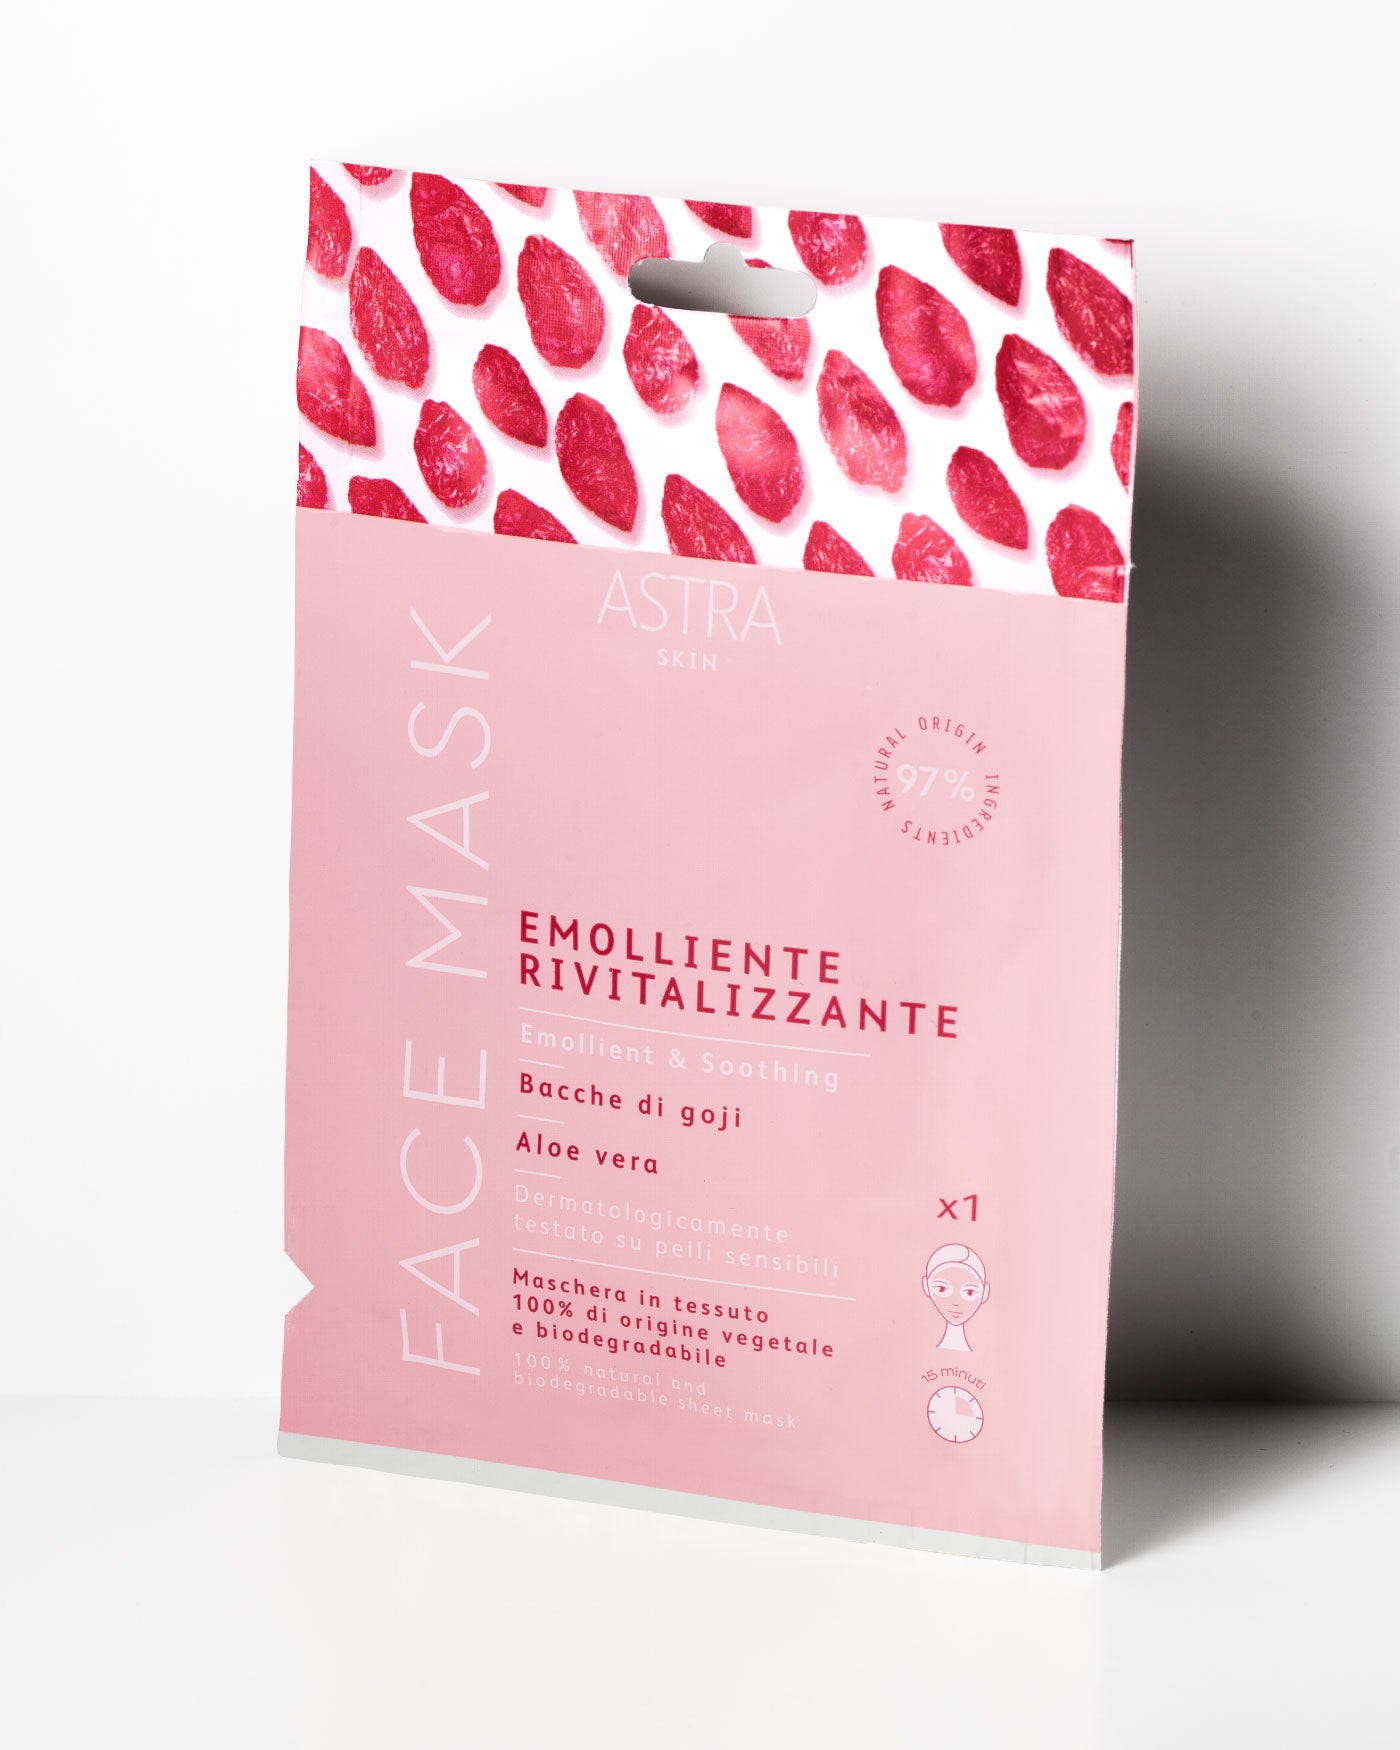 FACE MASK EMOLLIENTE RIVITALIZZANTE - All Products - Astra Make-Up